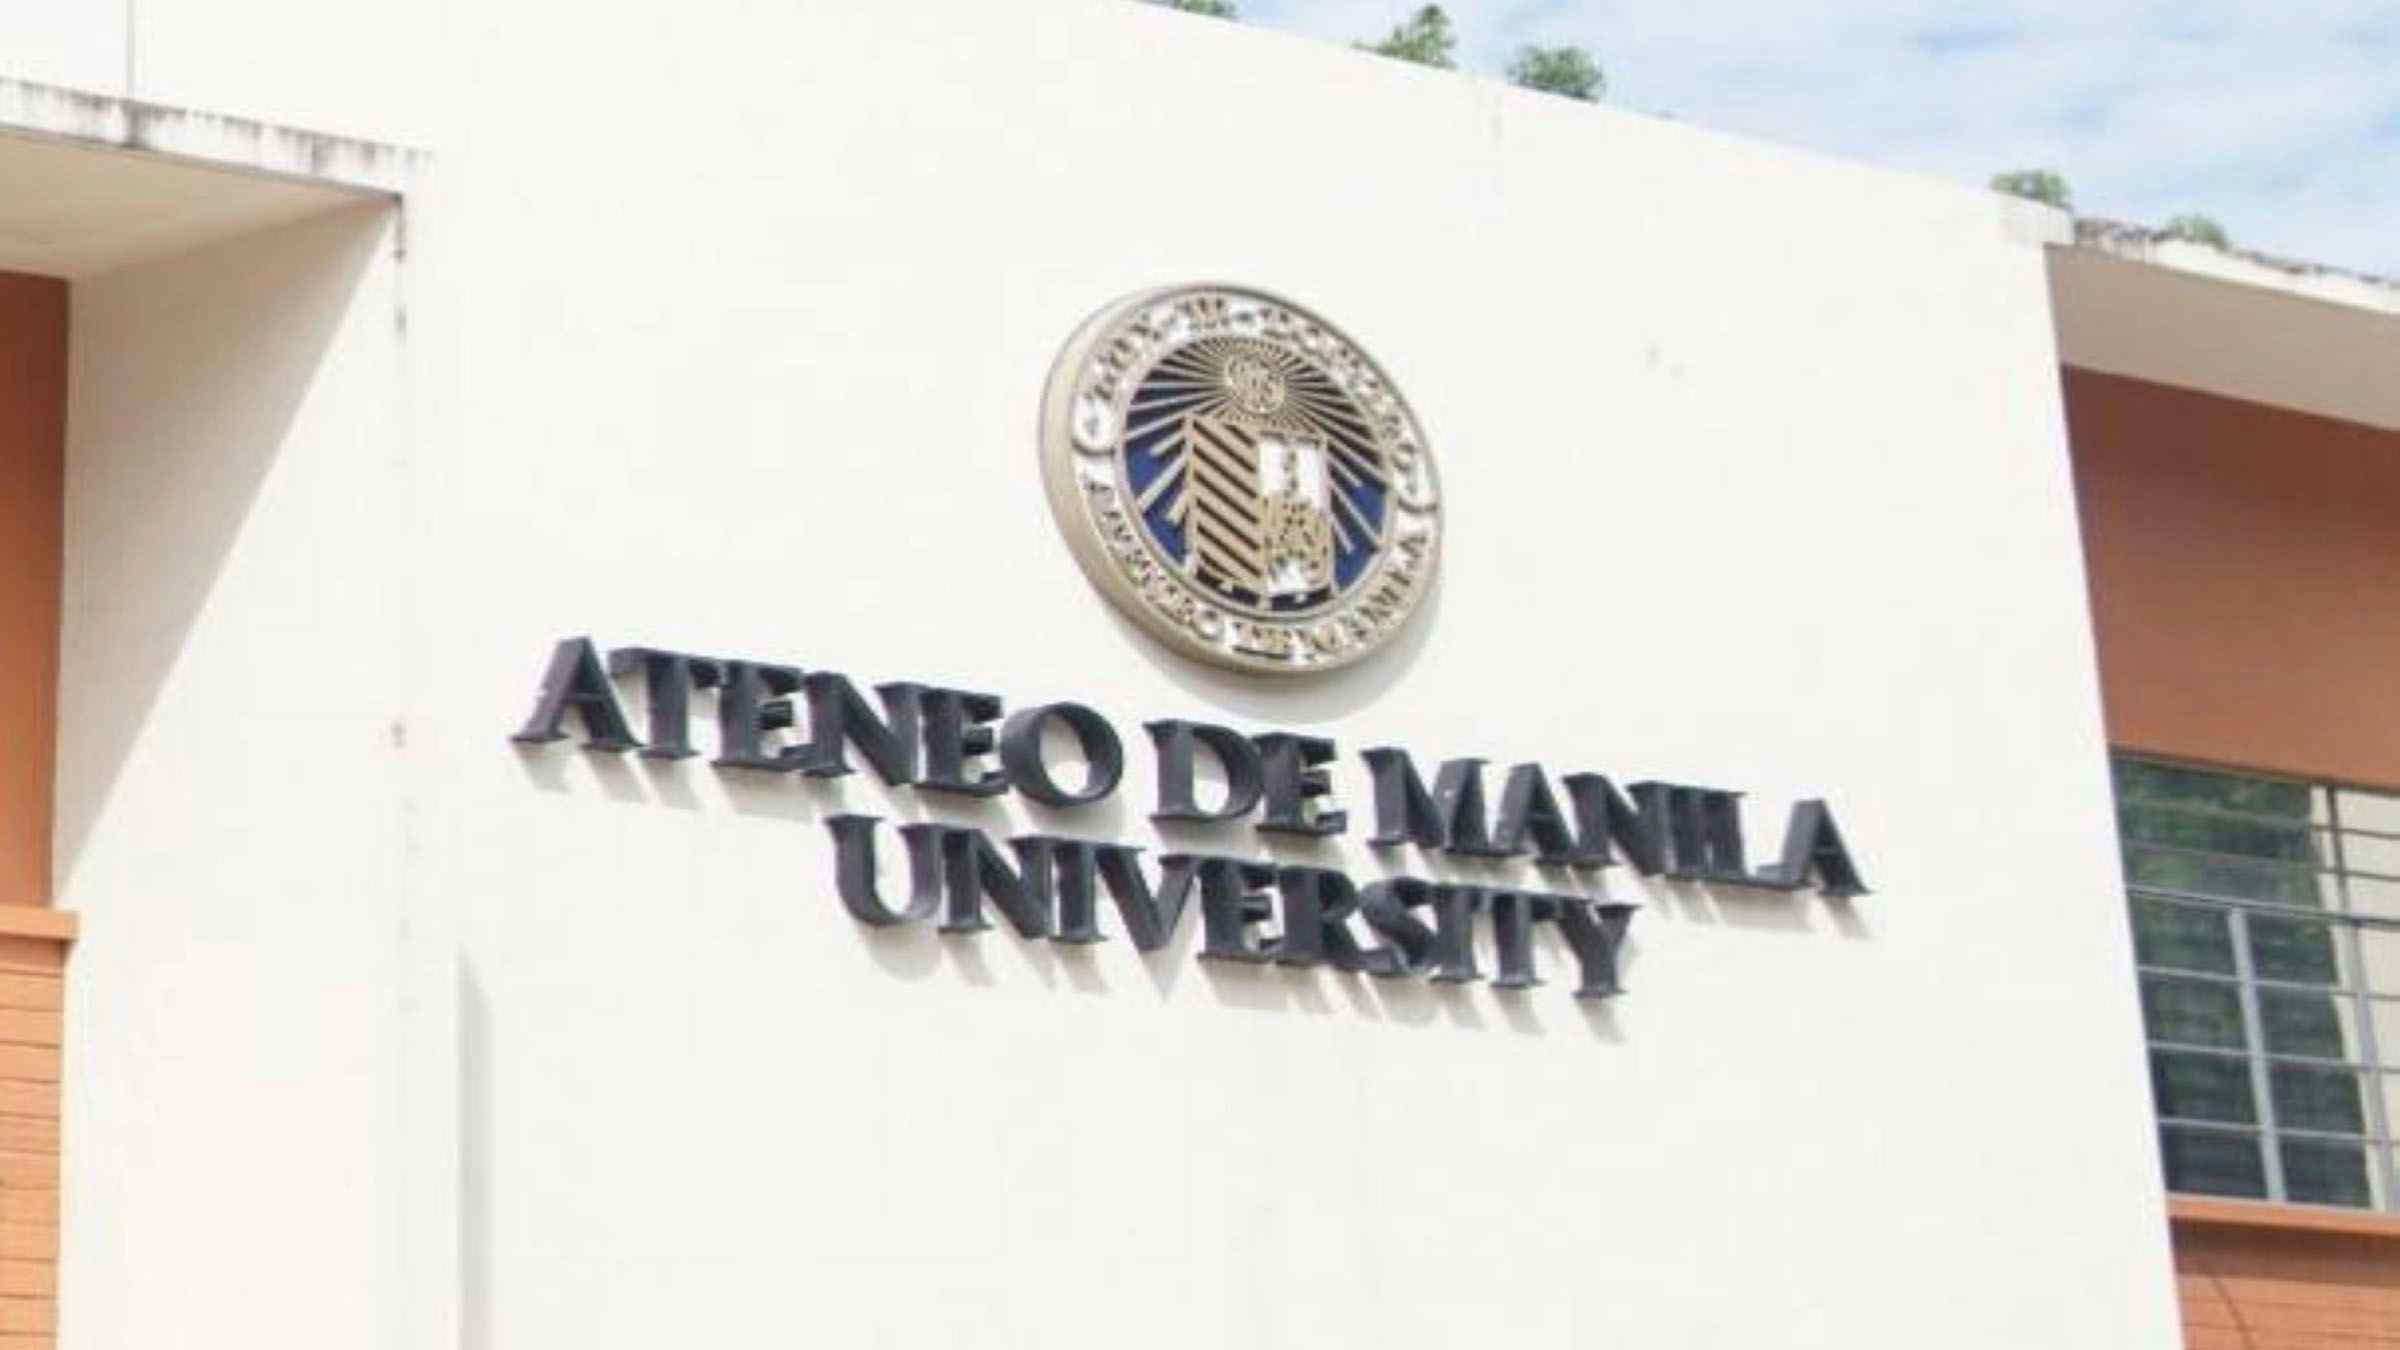 Suspending Mass is punishing all Ateneo students